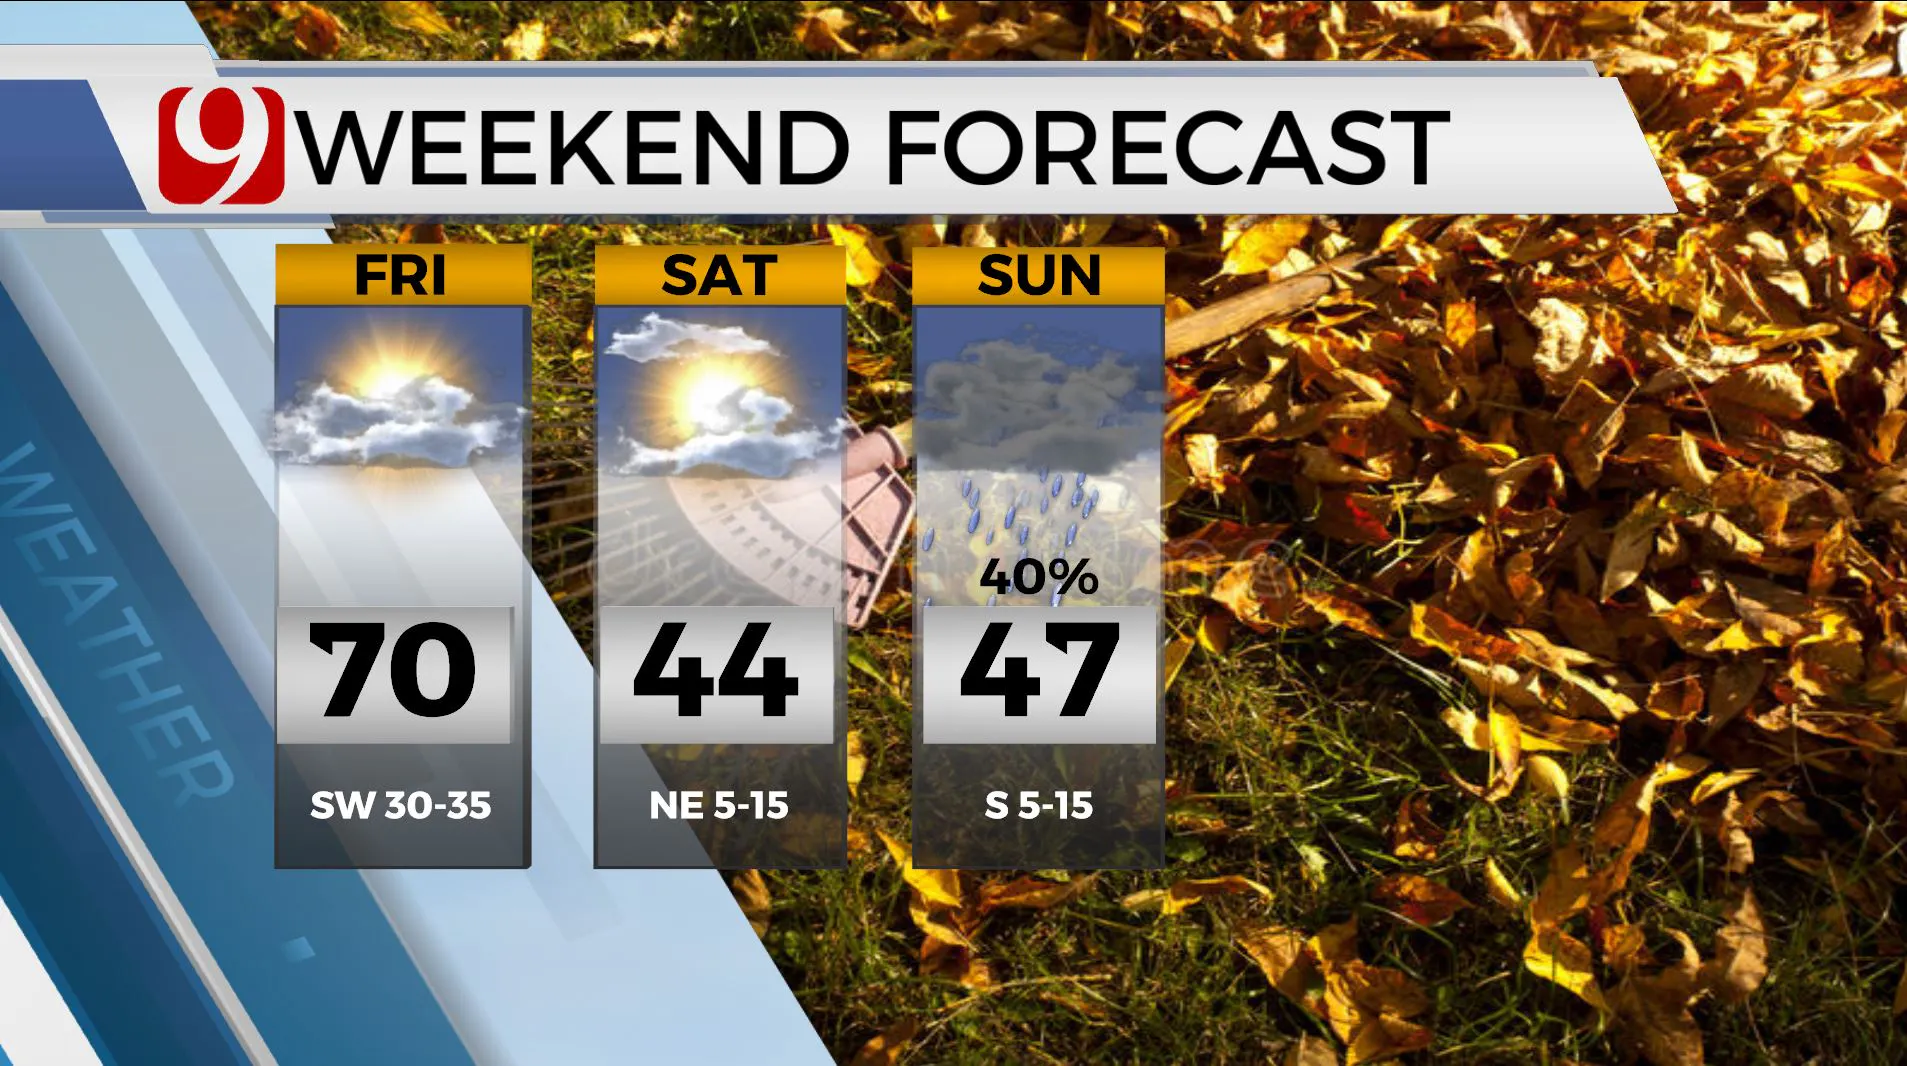 Weekend forecast temps and conditions.